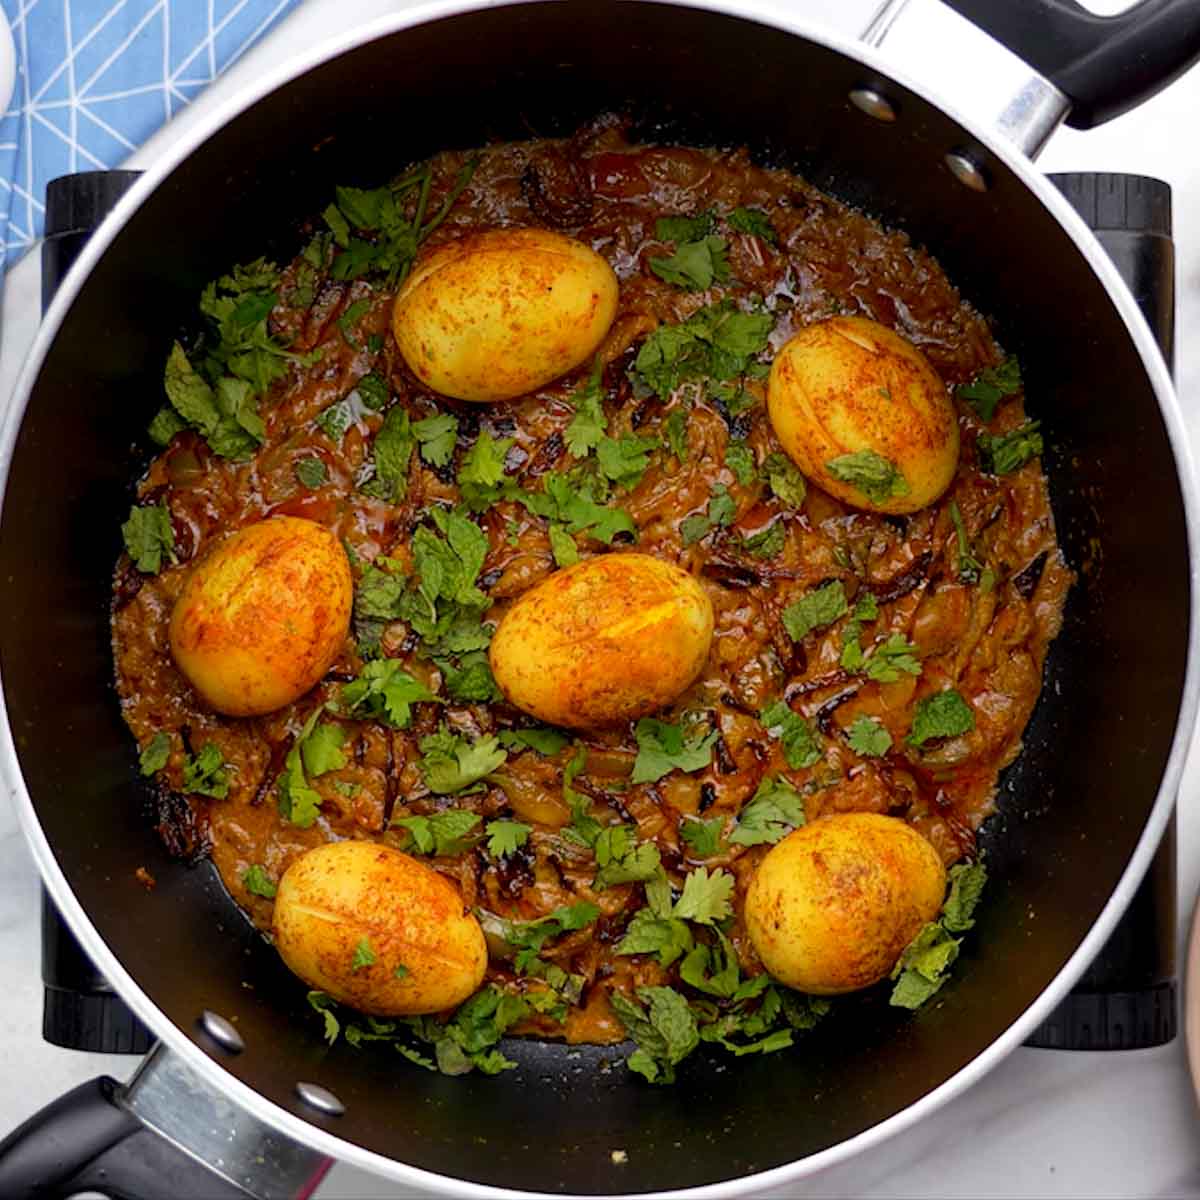 layer the biryani with egg, onion and mint